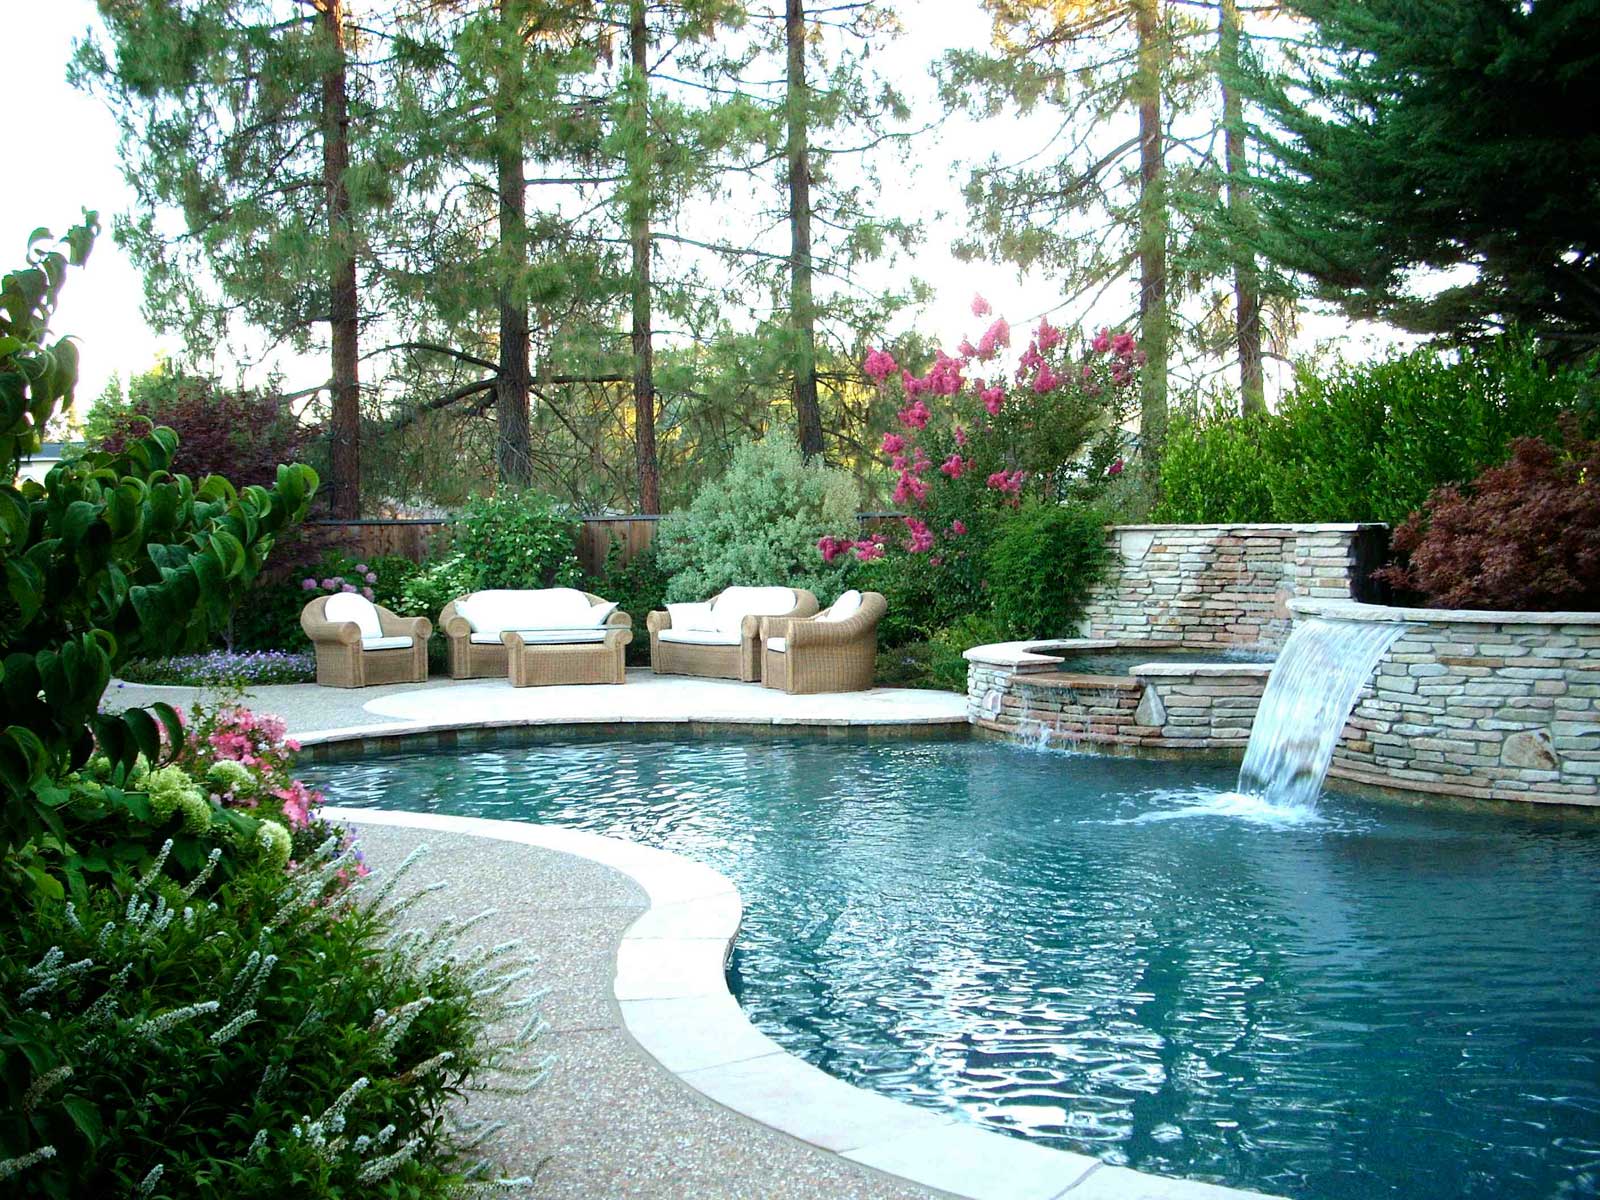 Landscape Design Ideas Backyard Landscape Design With Pool Ideas Using Small Waterfall And Wicker Sofa For Outdoor Furniture Ideas Inspiration Outdoor Backyard Landscape Design To Make The Most Of Your Space